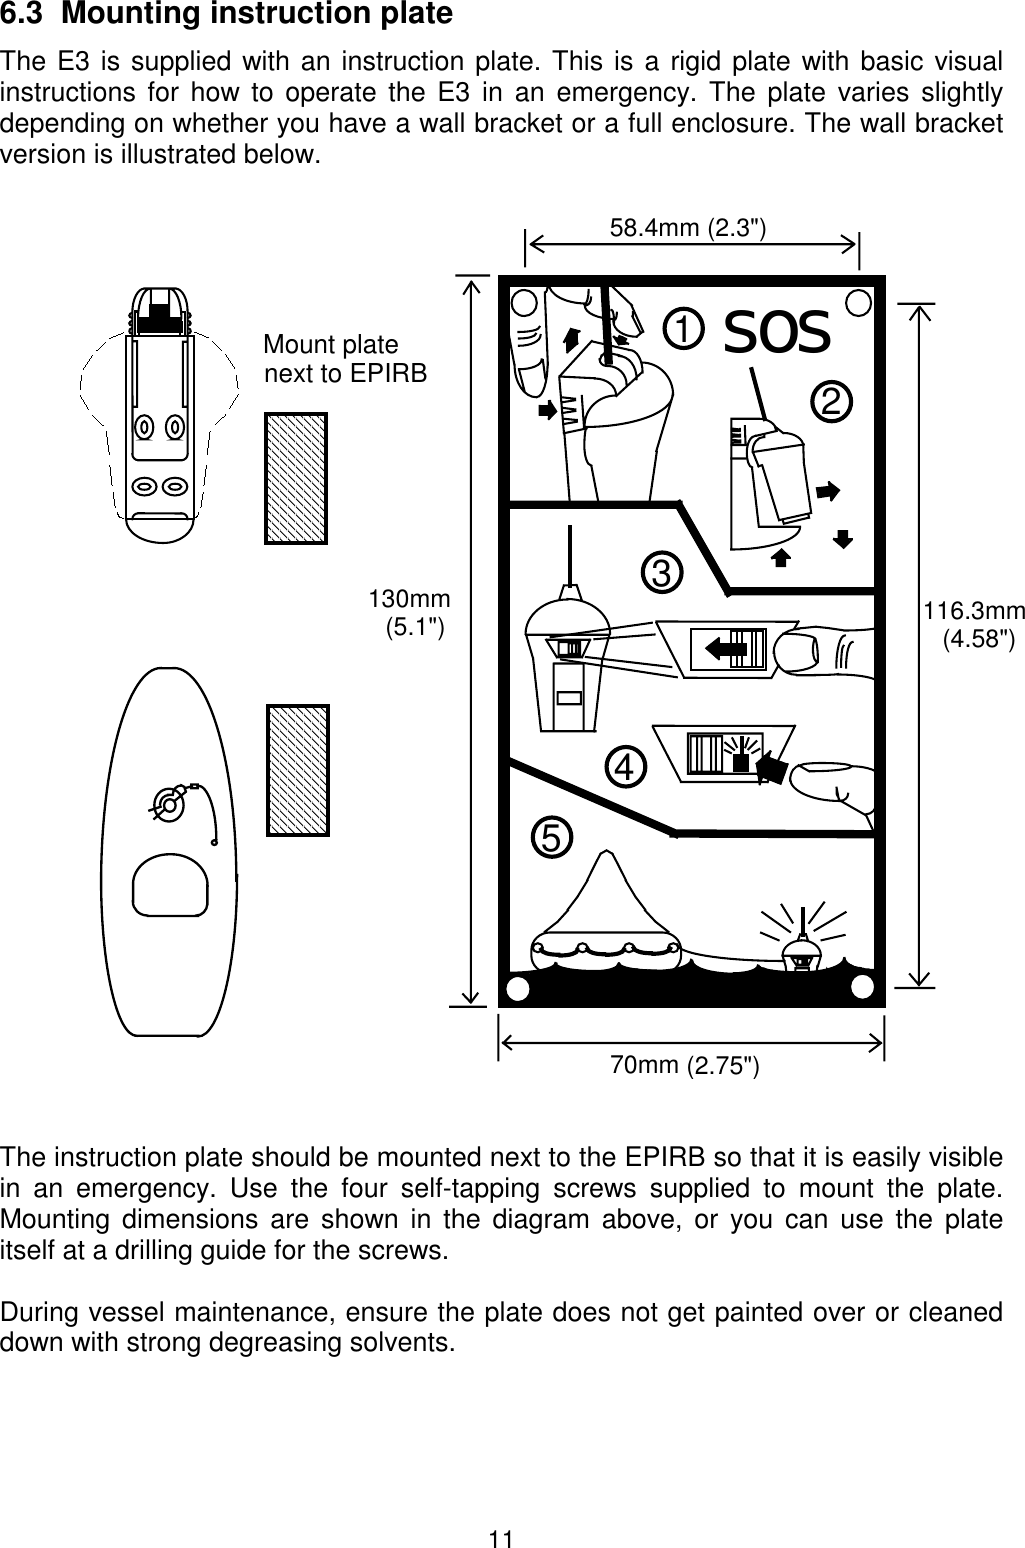 116.3  Mounting instruction plate The E3 is supplied with an instruction plate. This is a rigid plate with basic visualinstructions for how to operate the E3 in an emergency. The plate varies slightlydepending on whether you have a wall bracket or a full enclosure. The wall bracketversion is illustrated below.The instruction plate should be mounted next to the EPIRB so that it is easily visiblein an emergency. Use the four self-tapping screws supplied to mount the plate.Mounting dimensions are shown in the diagram above, or you can use the plateitself at a drilling guide for the screws.During vessel maintenance, ensure the plate does not get painted over or cleaneddown with strong degreasing solvents.sos2134558.4mm (2.3&quot;)70mm (2.75&quot;)130mm(5.1&quot;) 116.3mm(4.58&quot;)Mount platenext to EPIRB